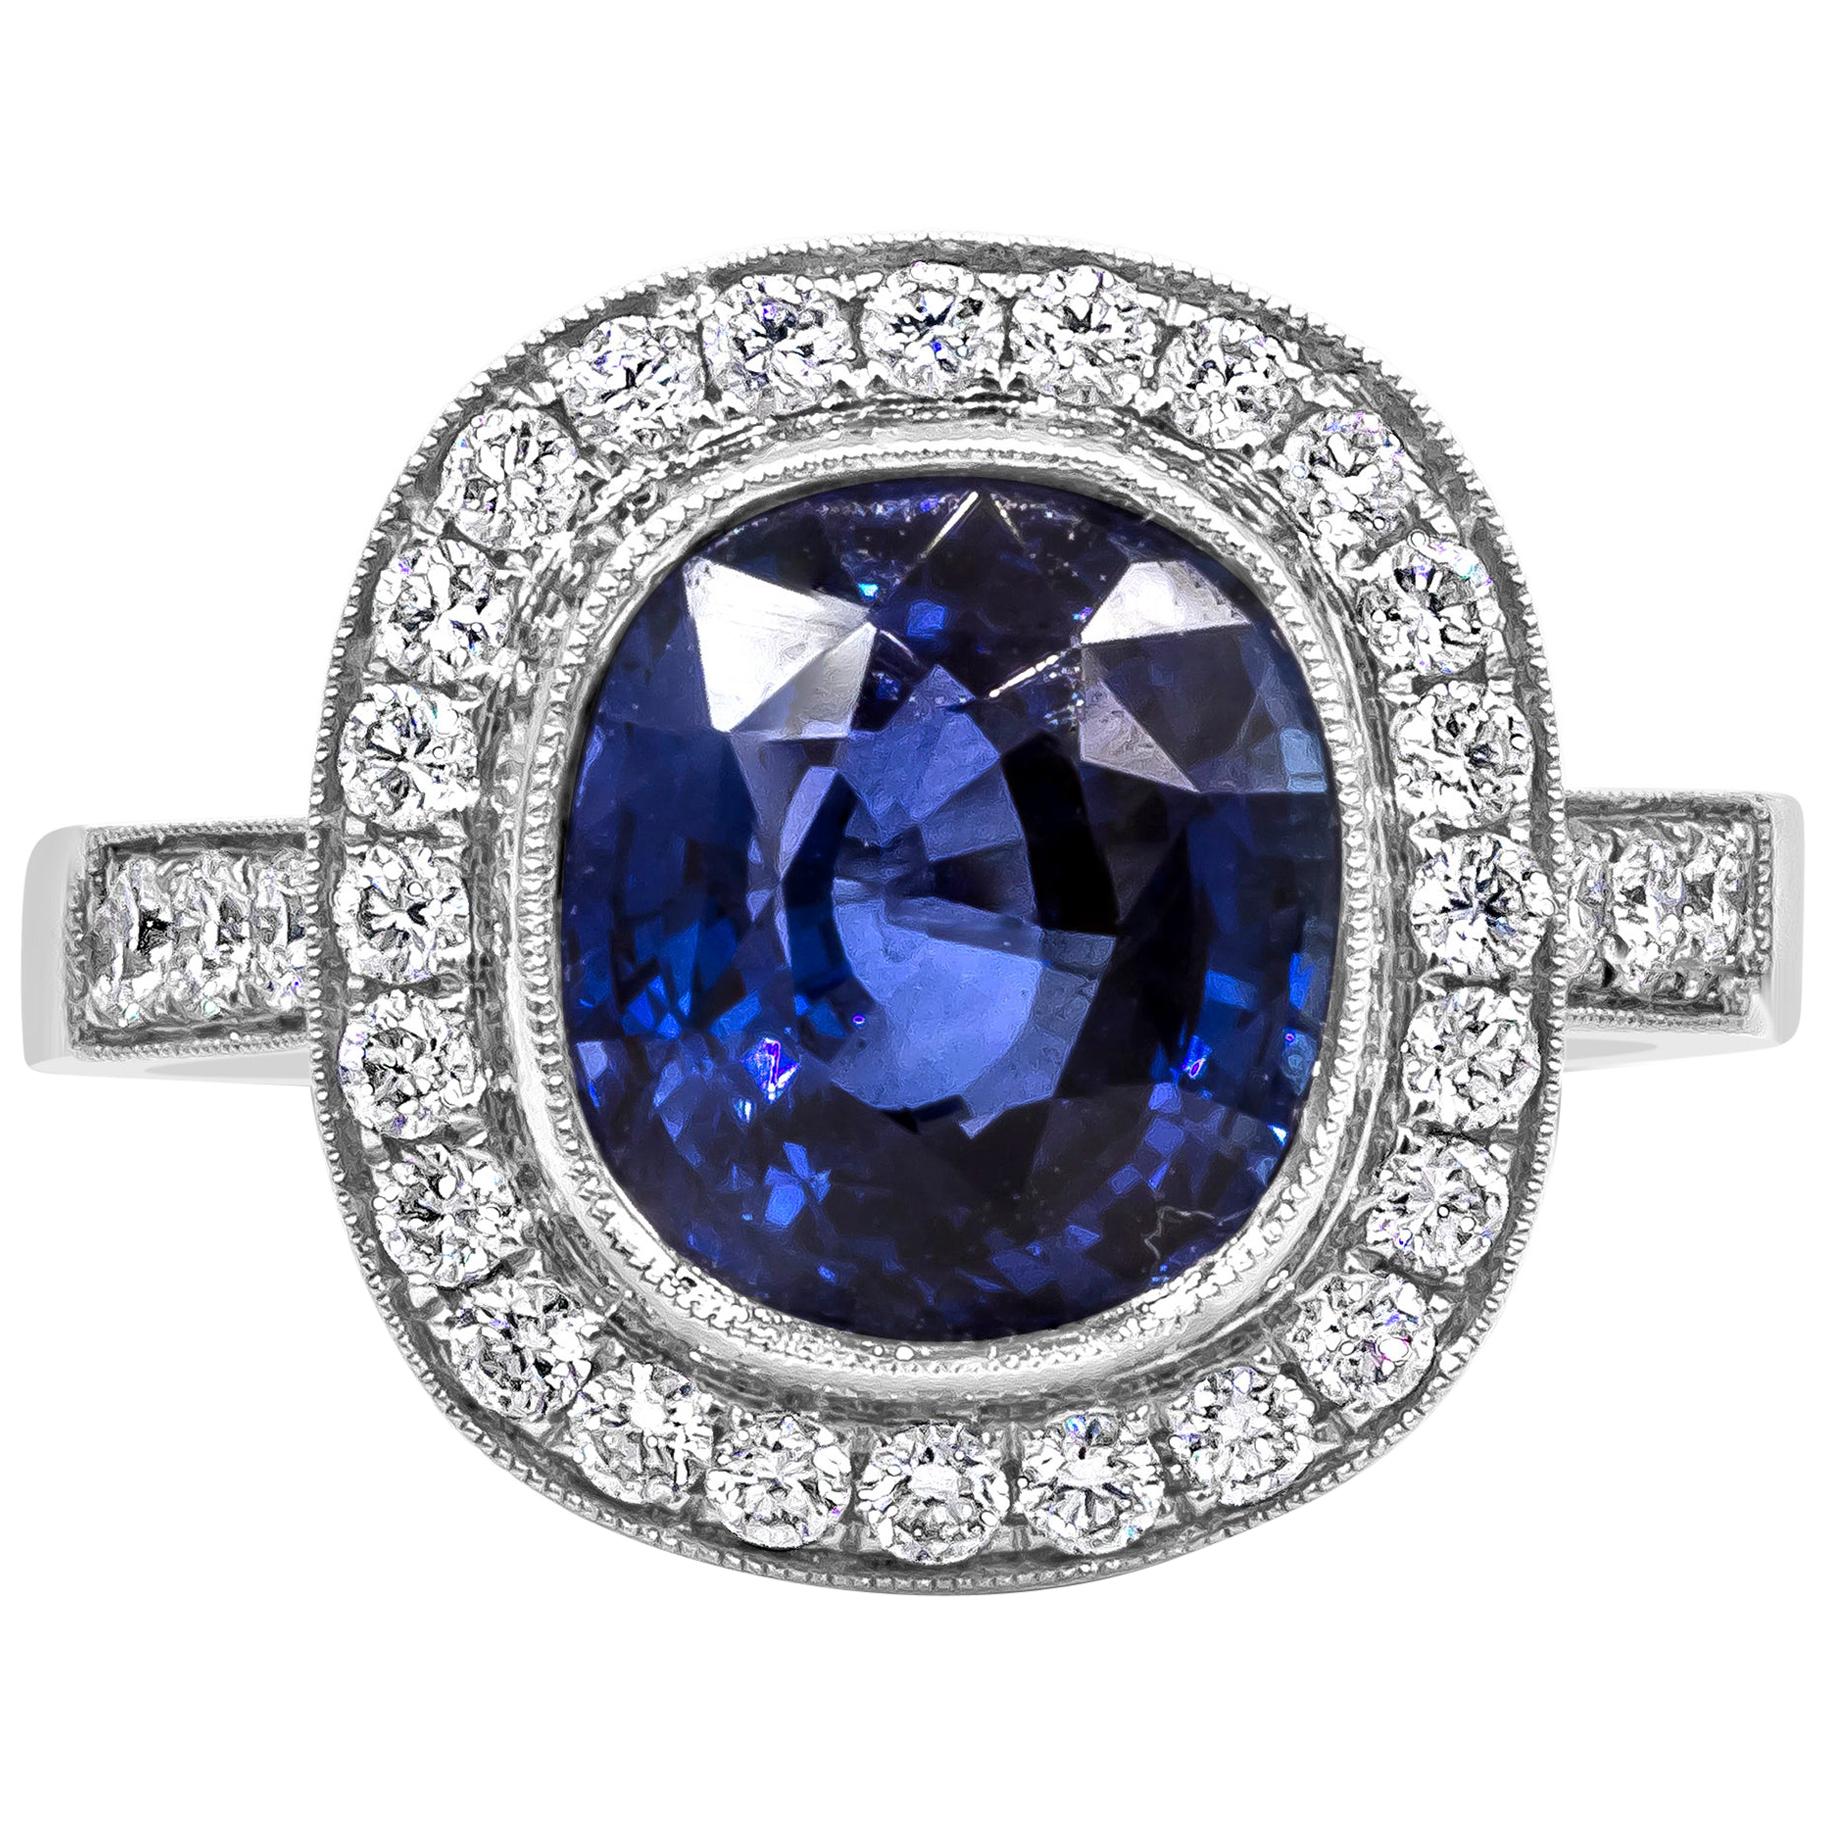 4.12 Carats Cushion Cut Royal Blue Sapphire with Diamond Halo Engagement Ring